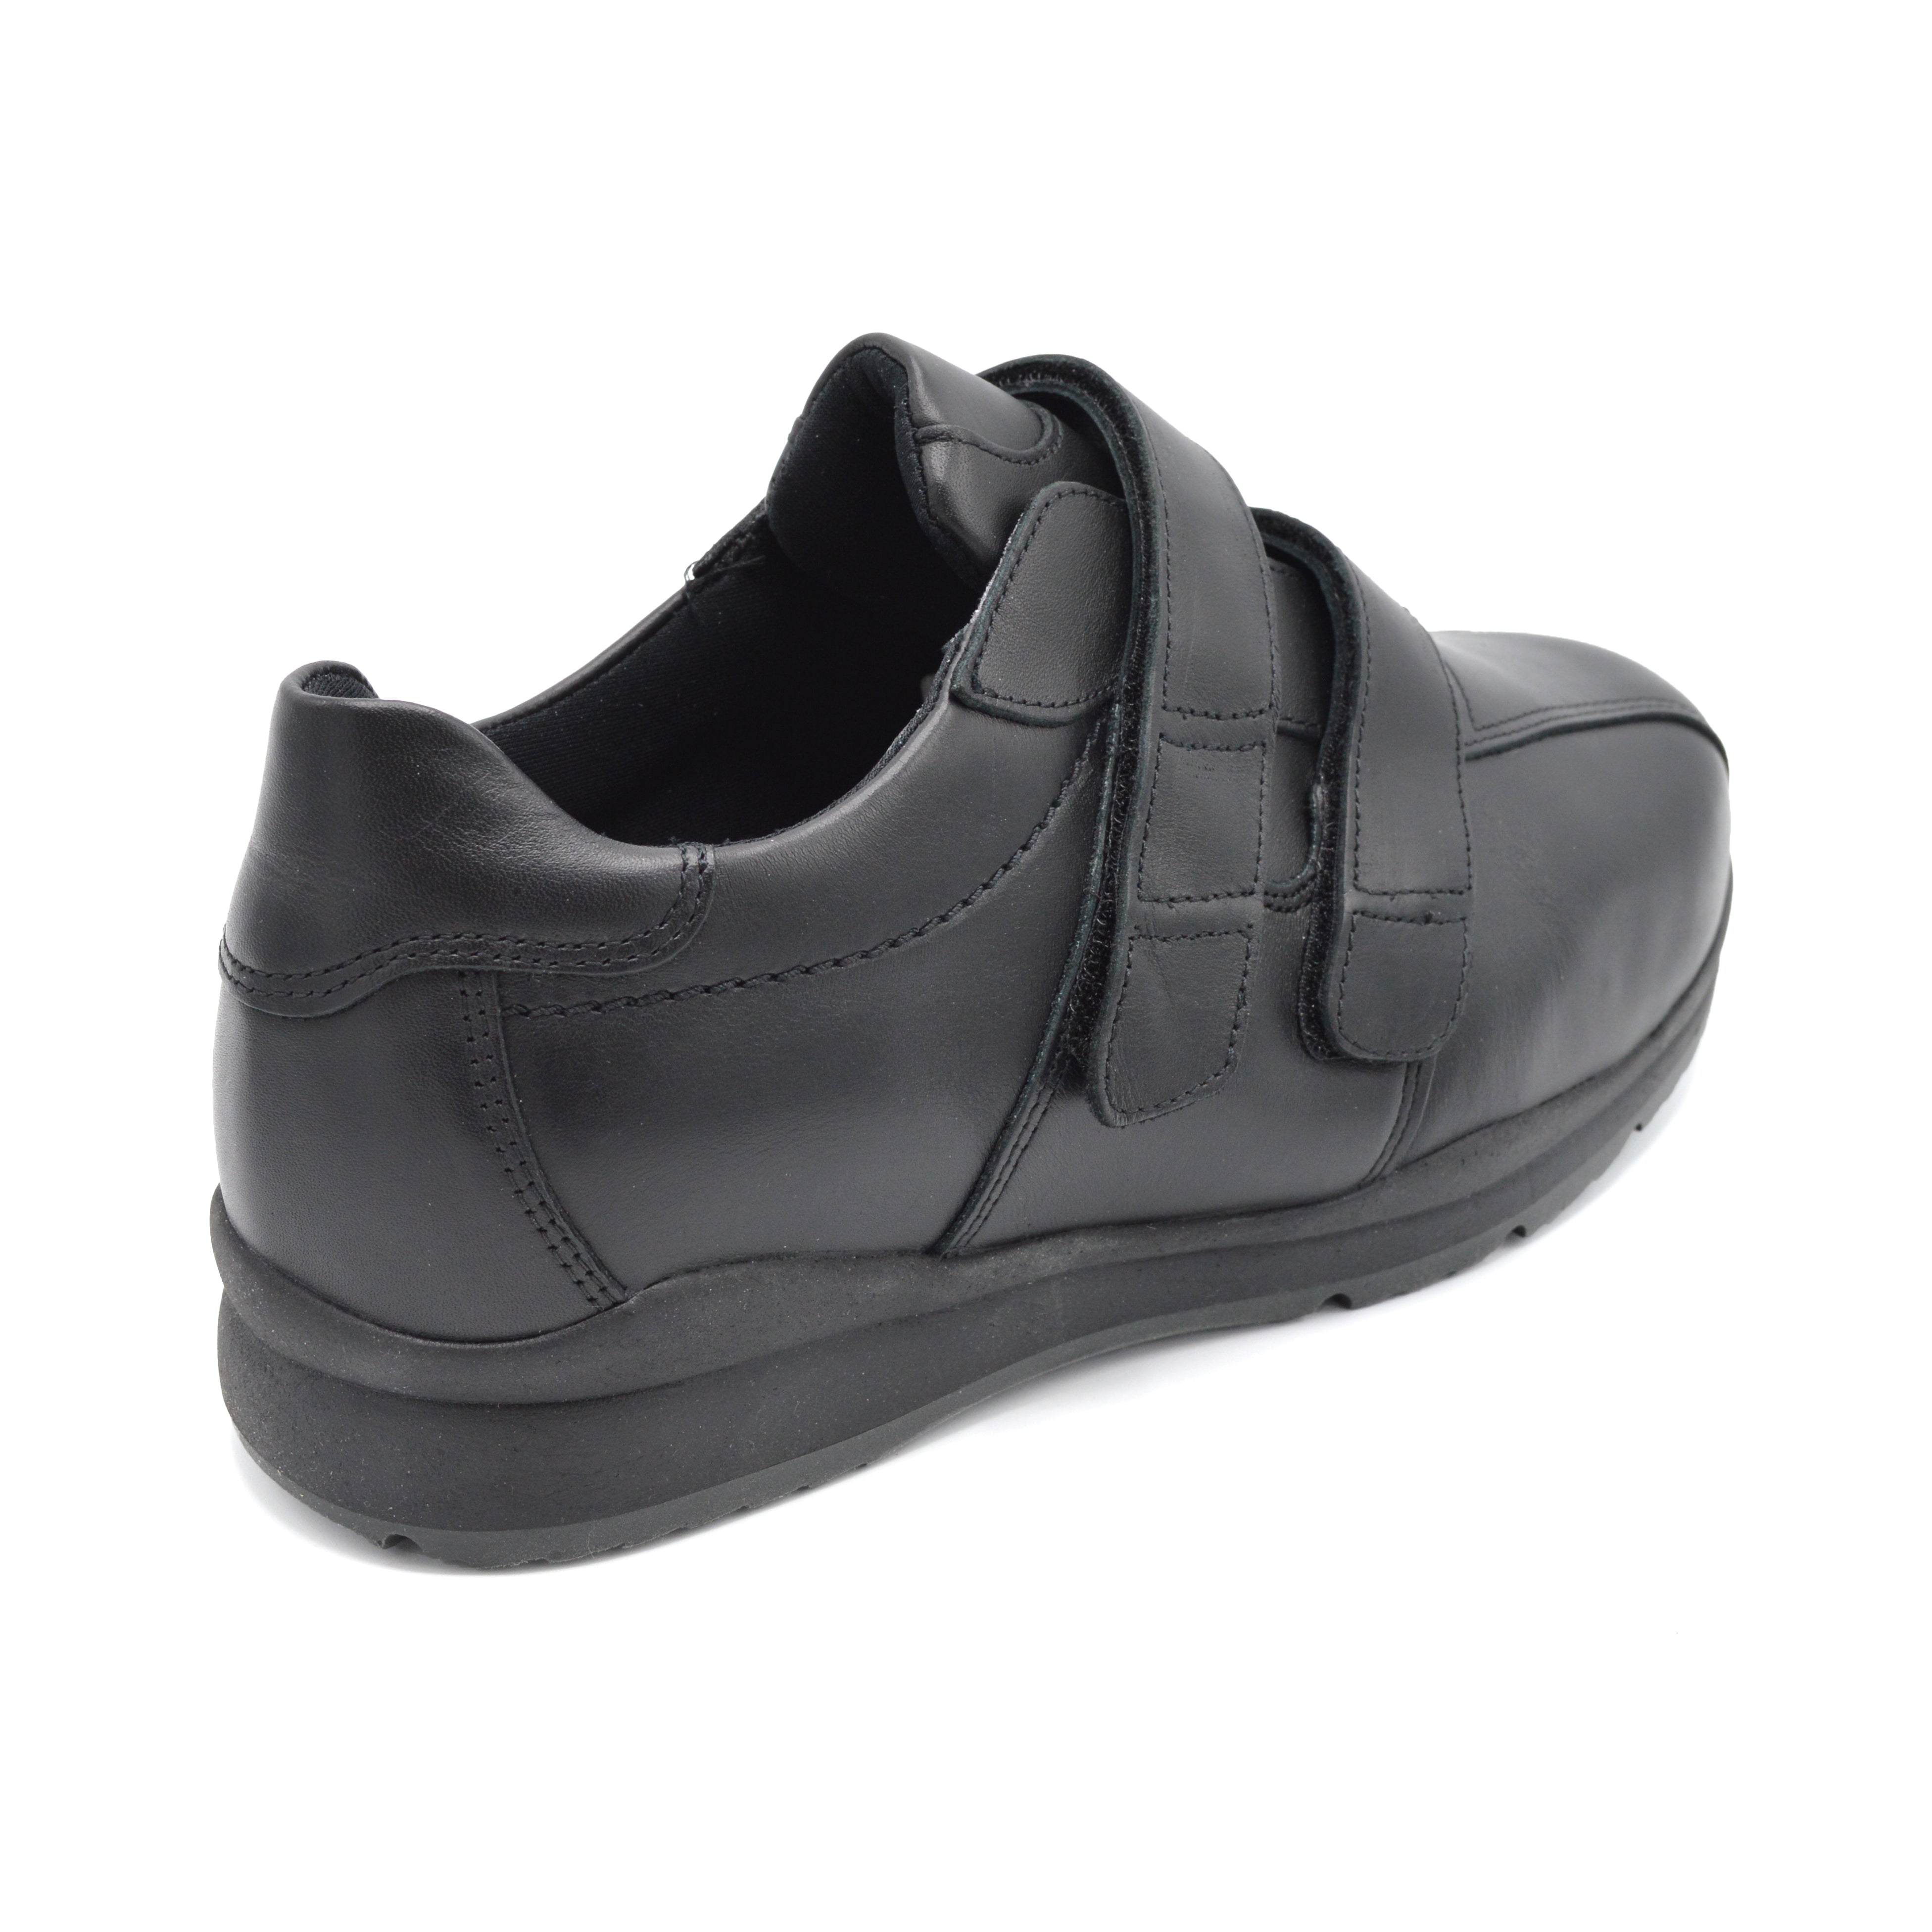 Stephen - Men's Extra Wide Fitting Velcro Shoe. Black — Wide Shoes